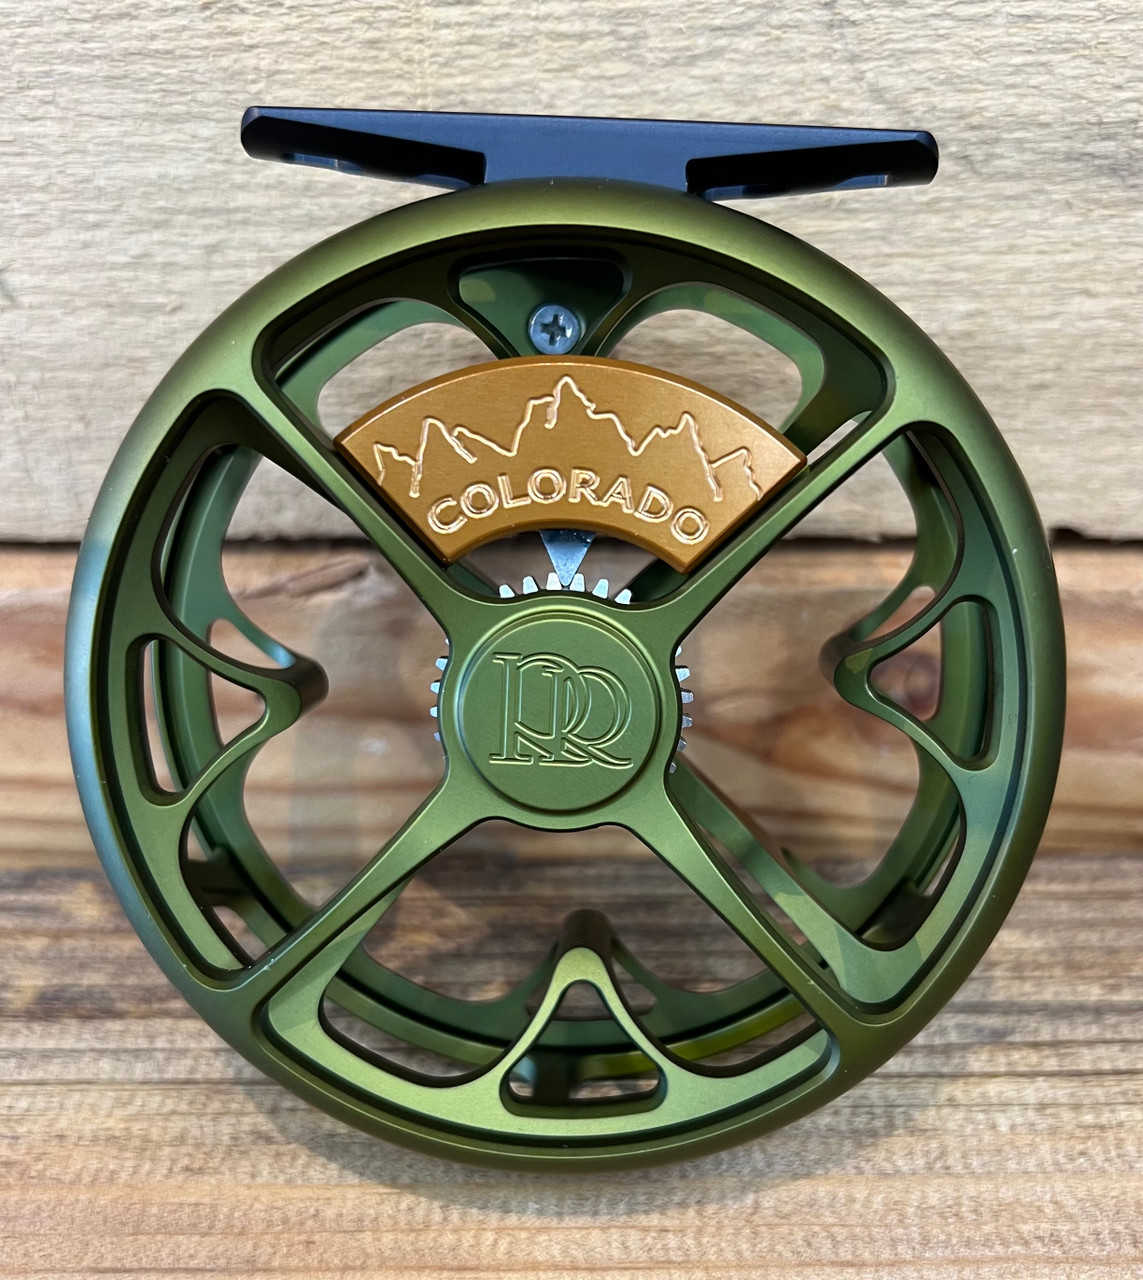 Ross Colorado Fly Reel - 4/5 WT - Matte Olive - Made in USA - Ed's Fly Shop